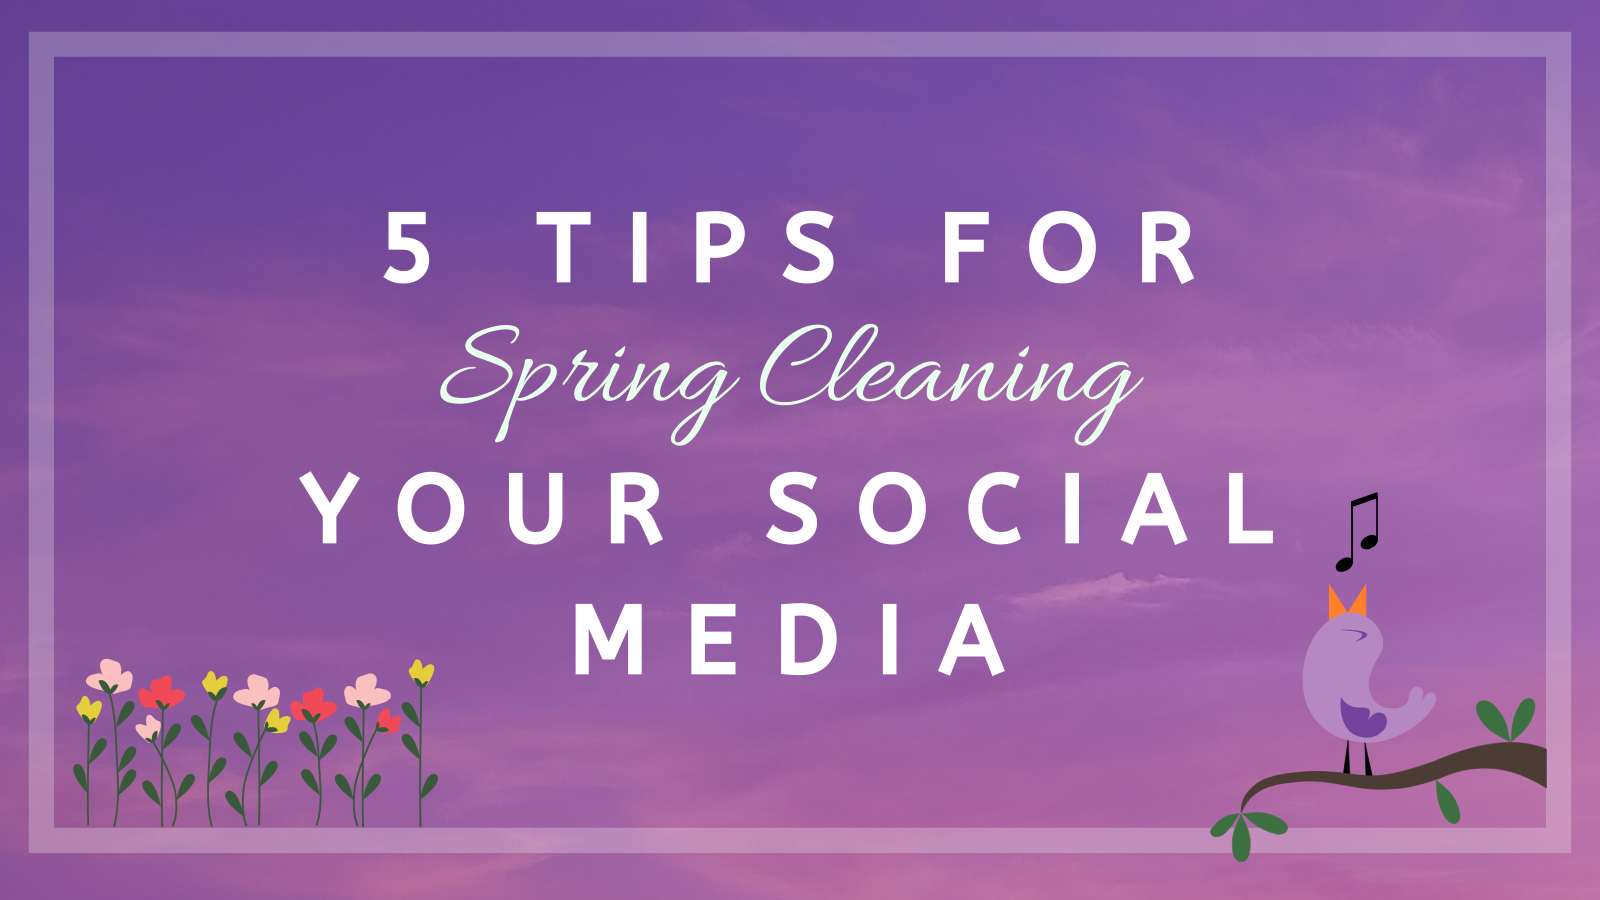 5 Tips for Spring Cleaning Your Social Media